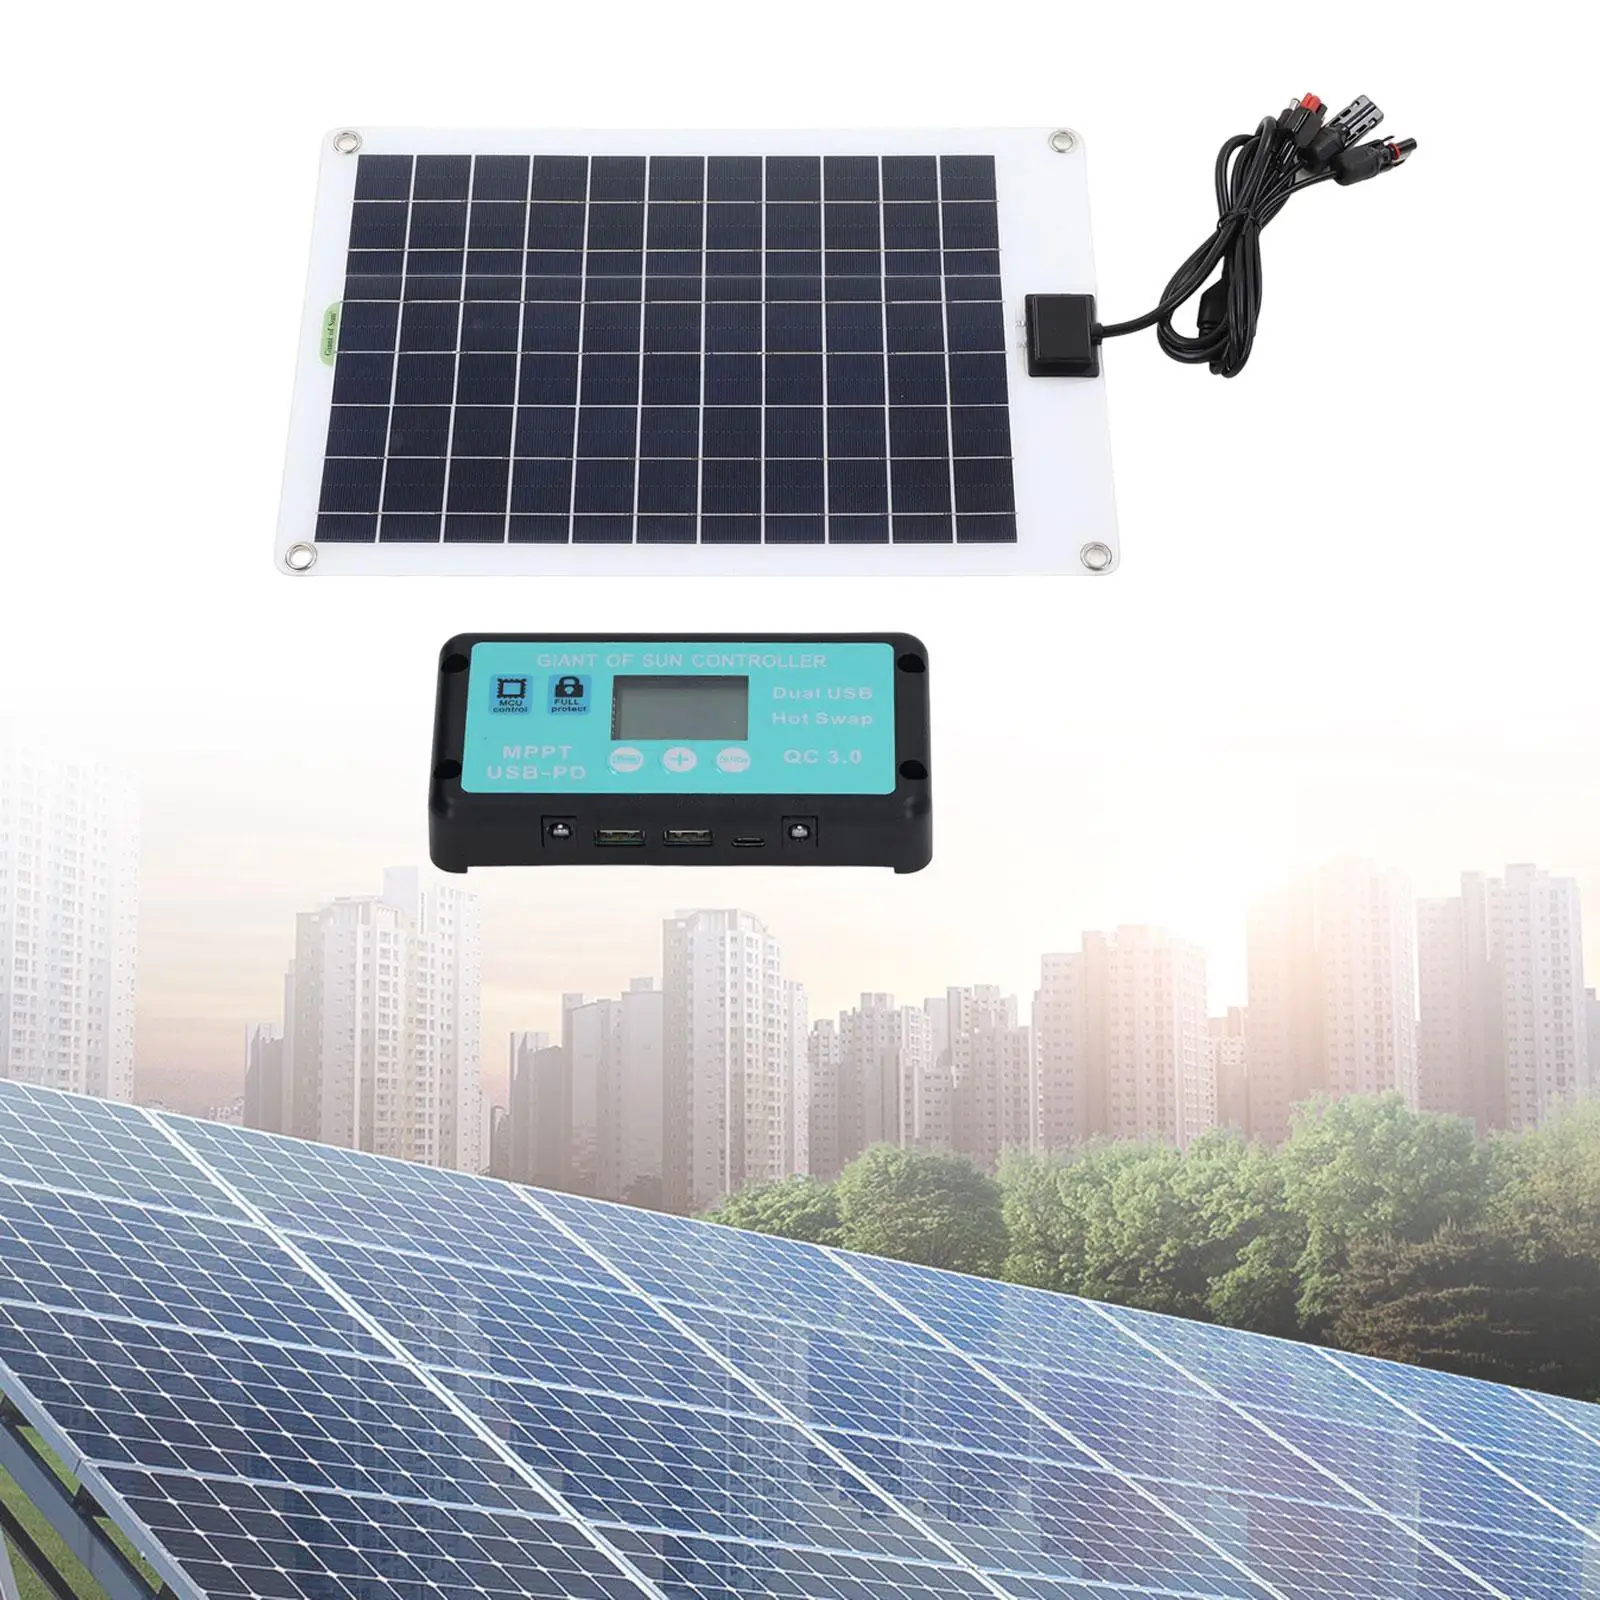 Monocrystalline Silicon Solar Panel with Dual USB Mppt Controller Solar Charge Controller LCD Display XT60 50W for Car RV Yacht